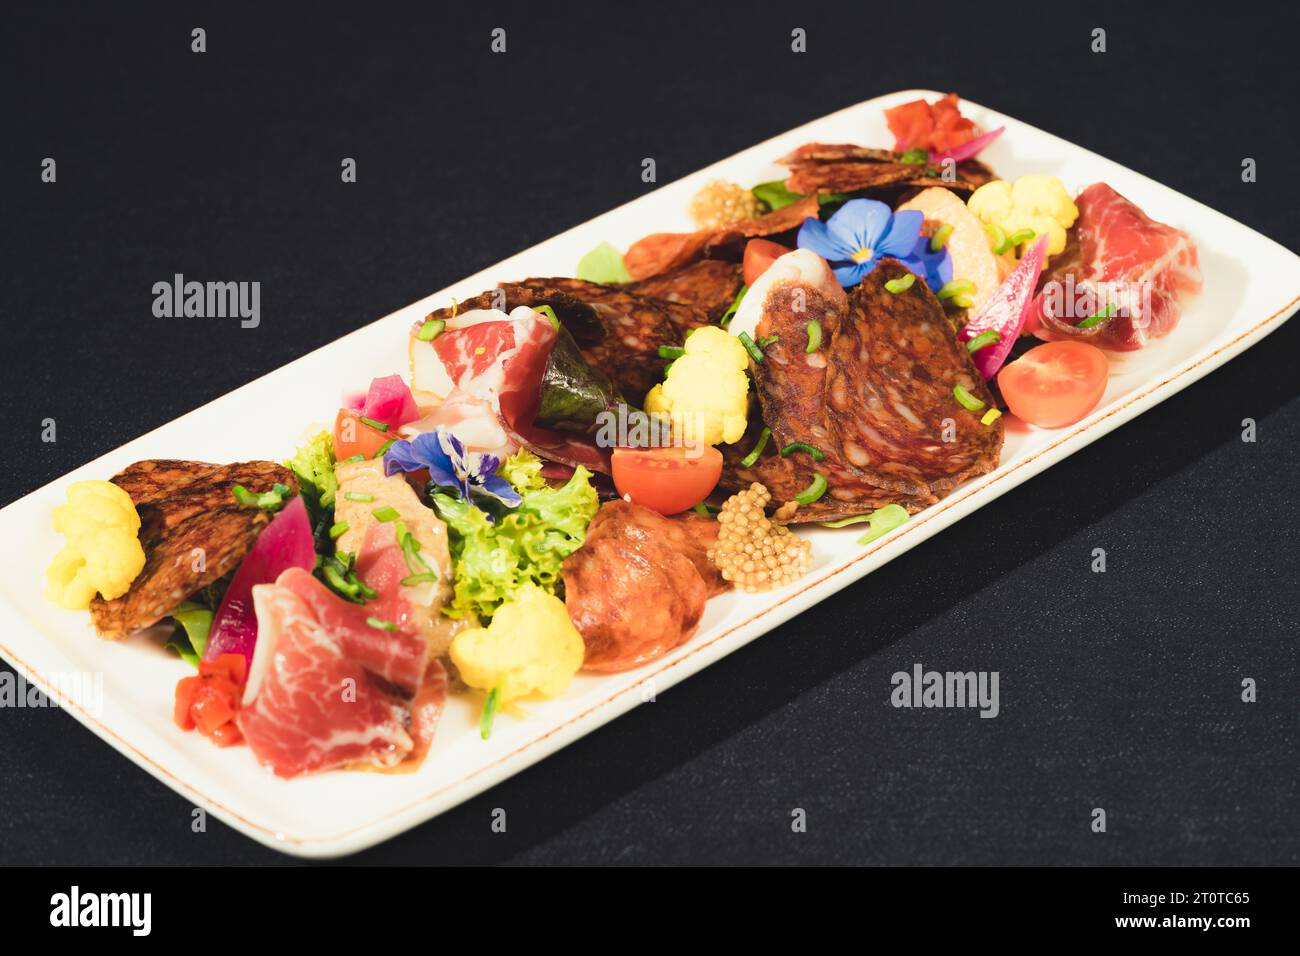 A closeup of a plate filled with a variety of cooked meats Stock Photo